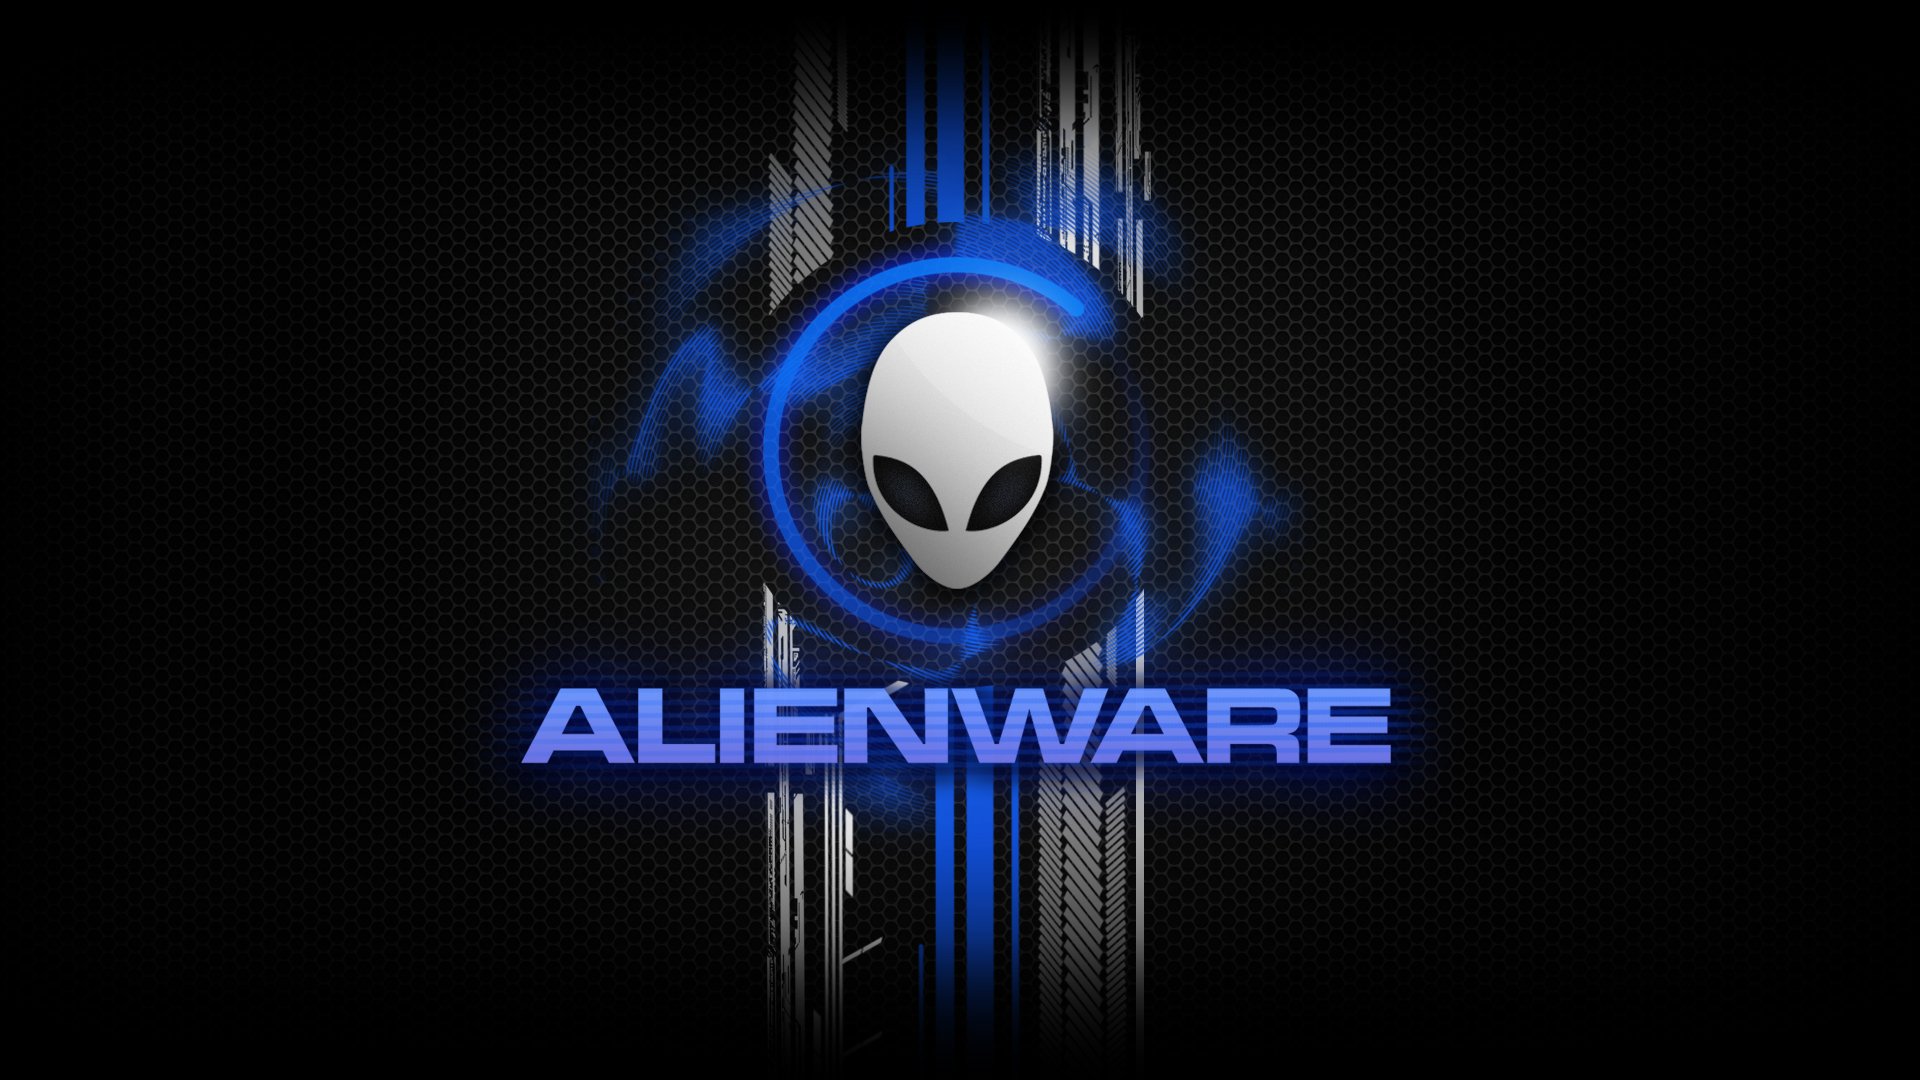 Wonderful Engineering and Technology HD Alienware